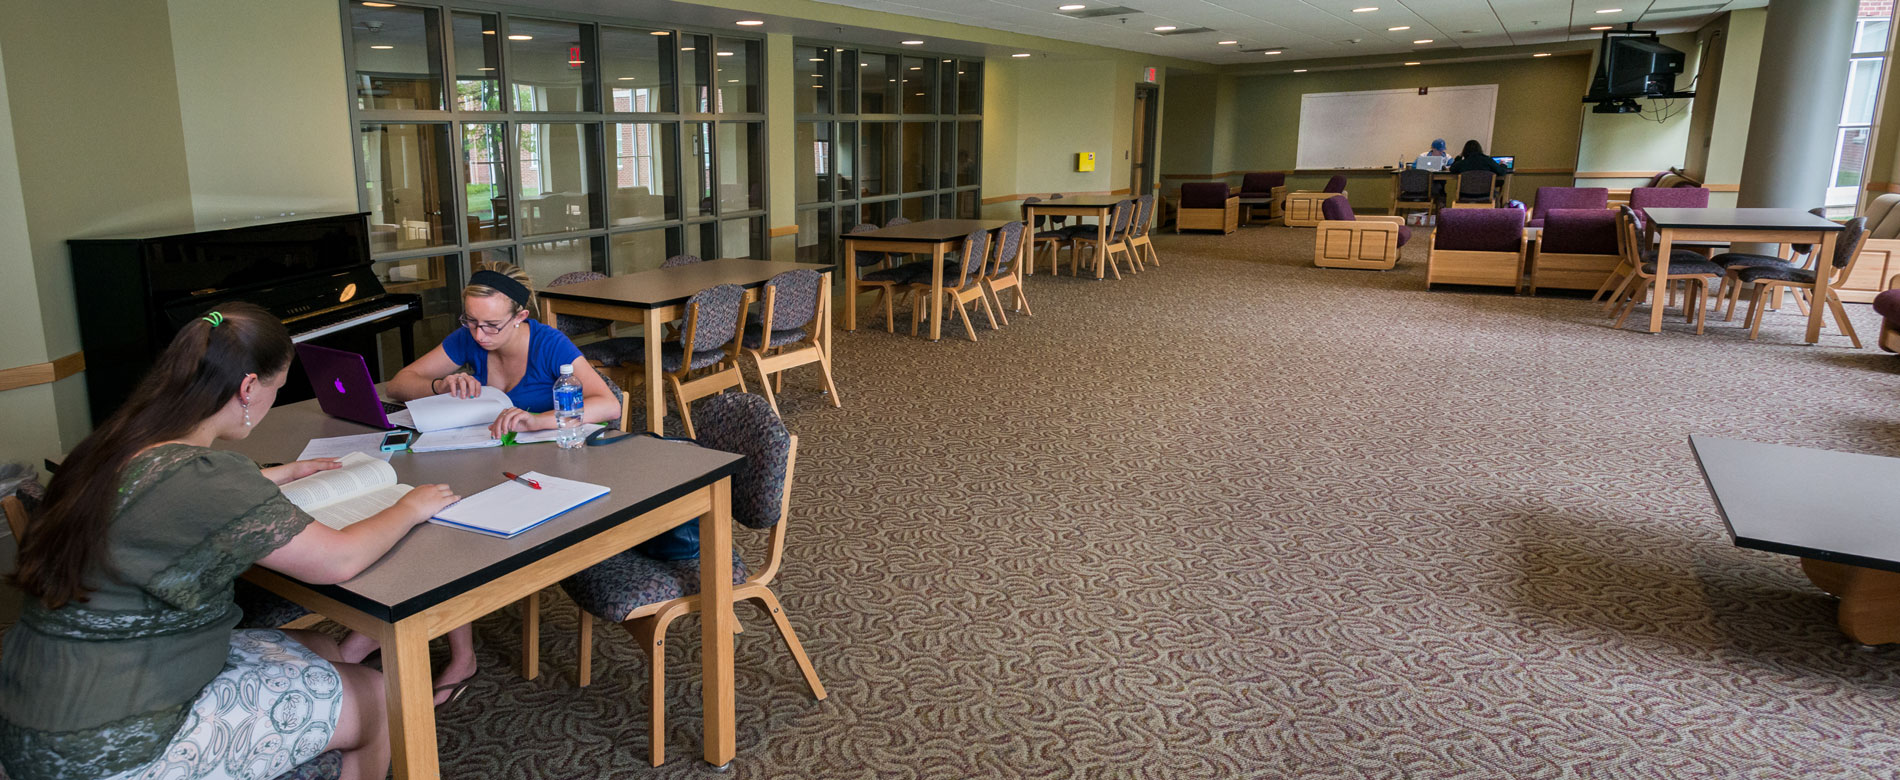 Students studying in a large lounge area with tables and comfortable chairs